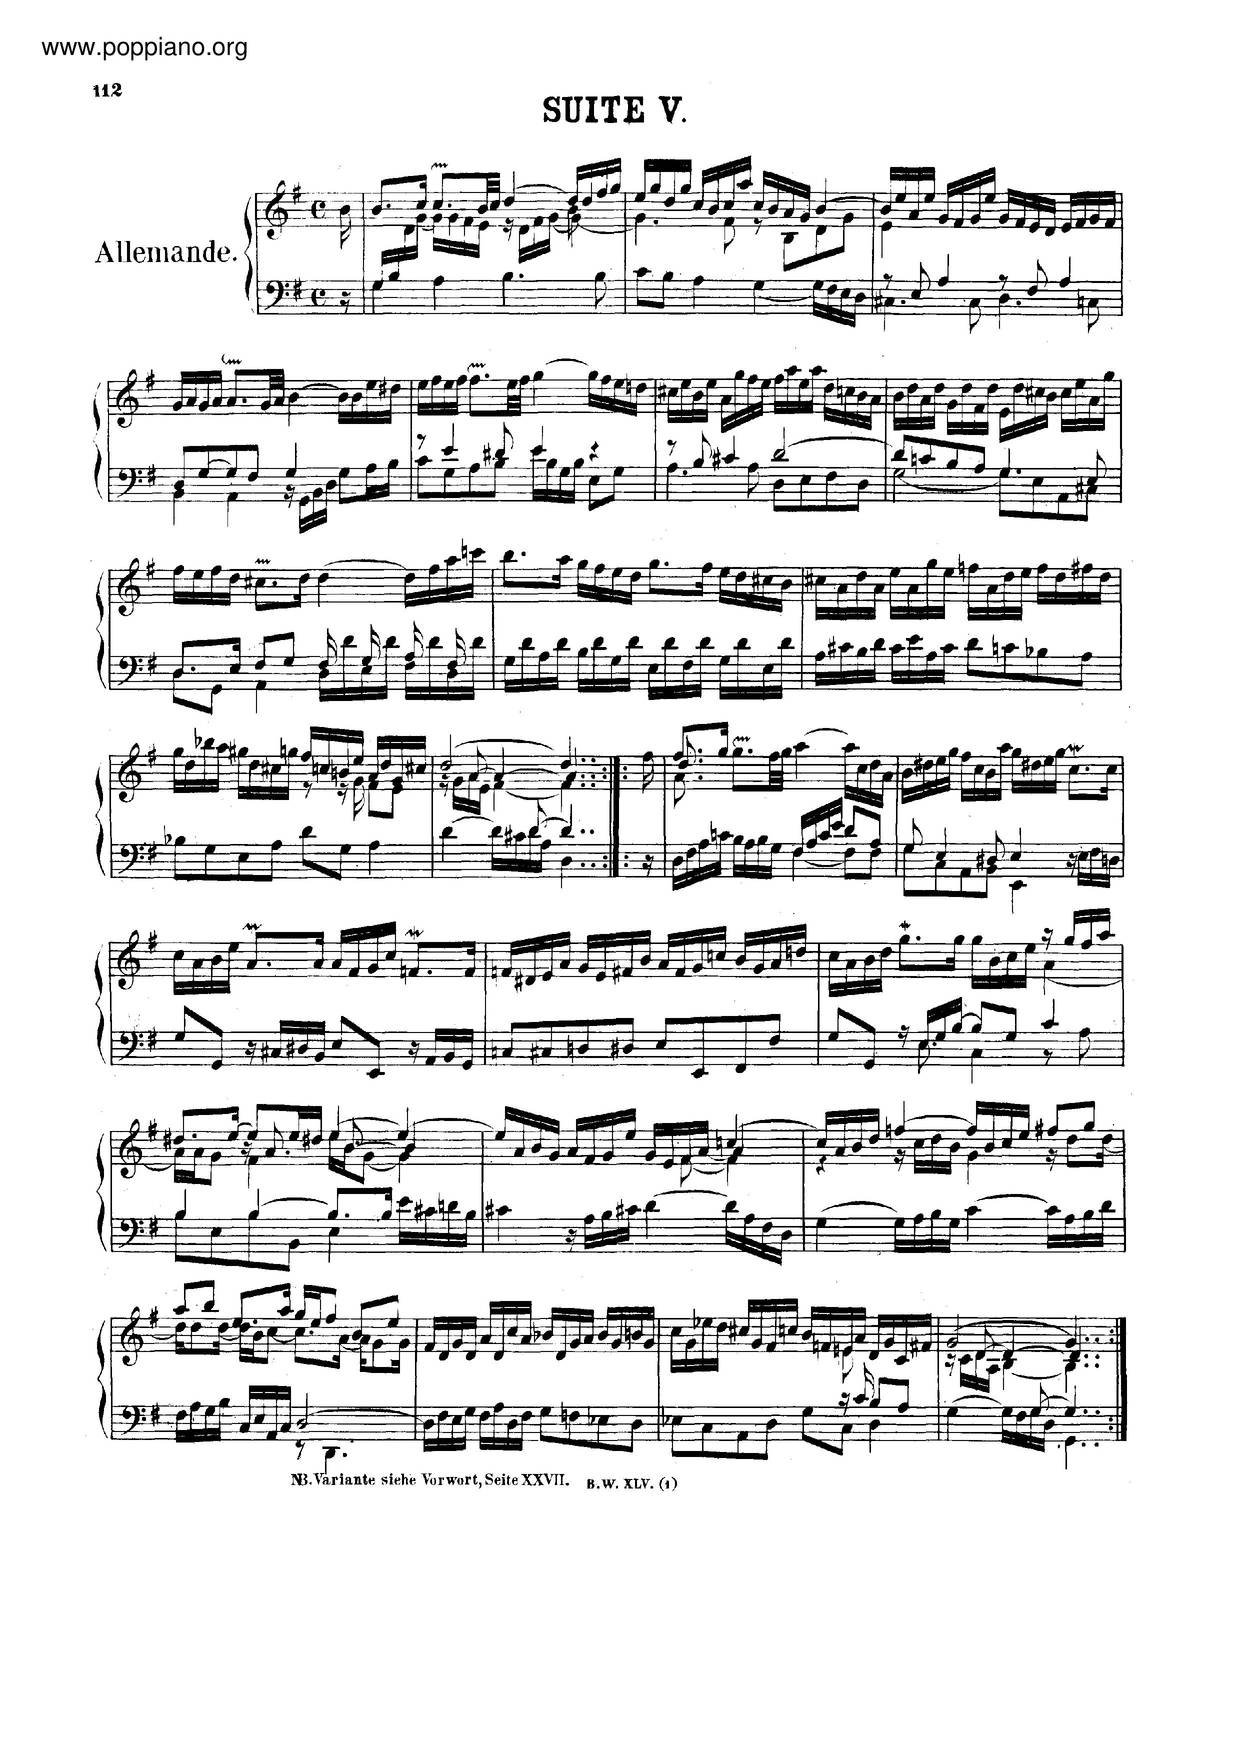 French Suite No. 5 In G Major, BWV 816 Score